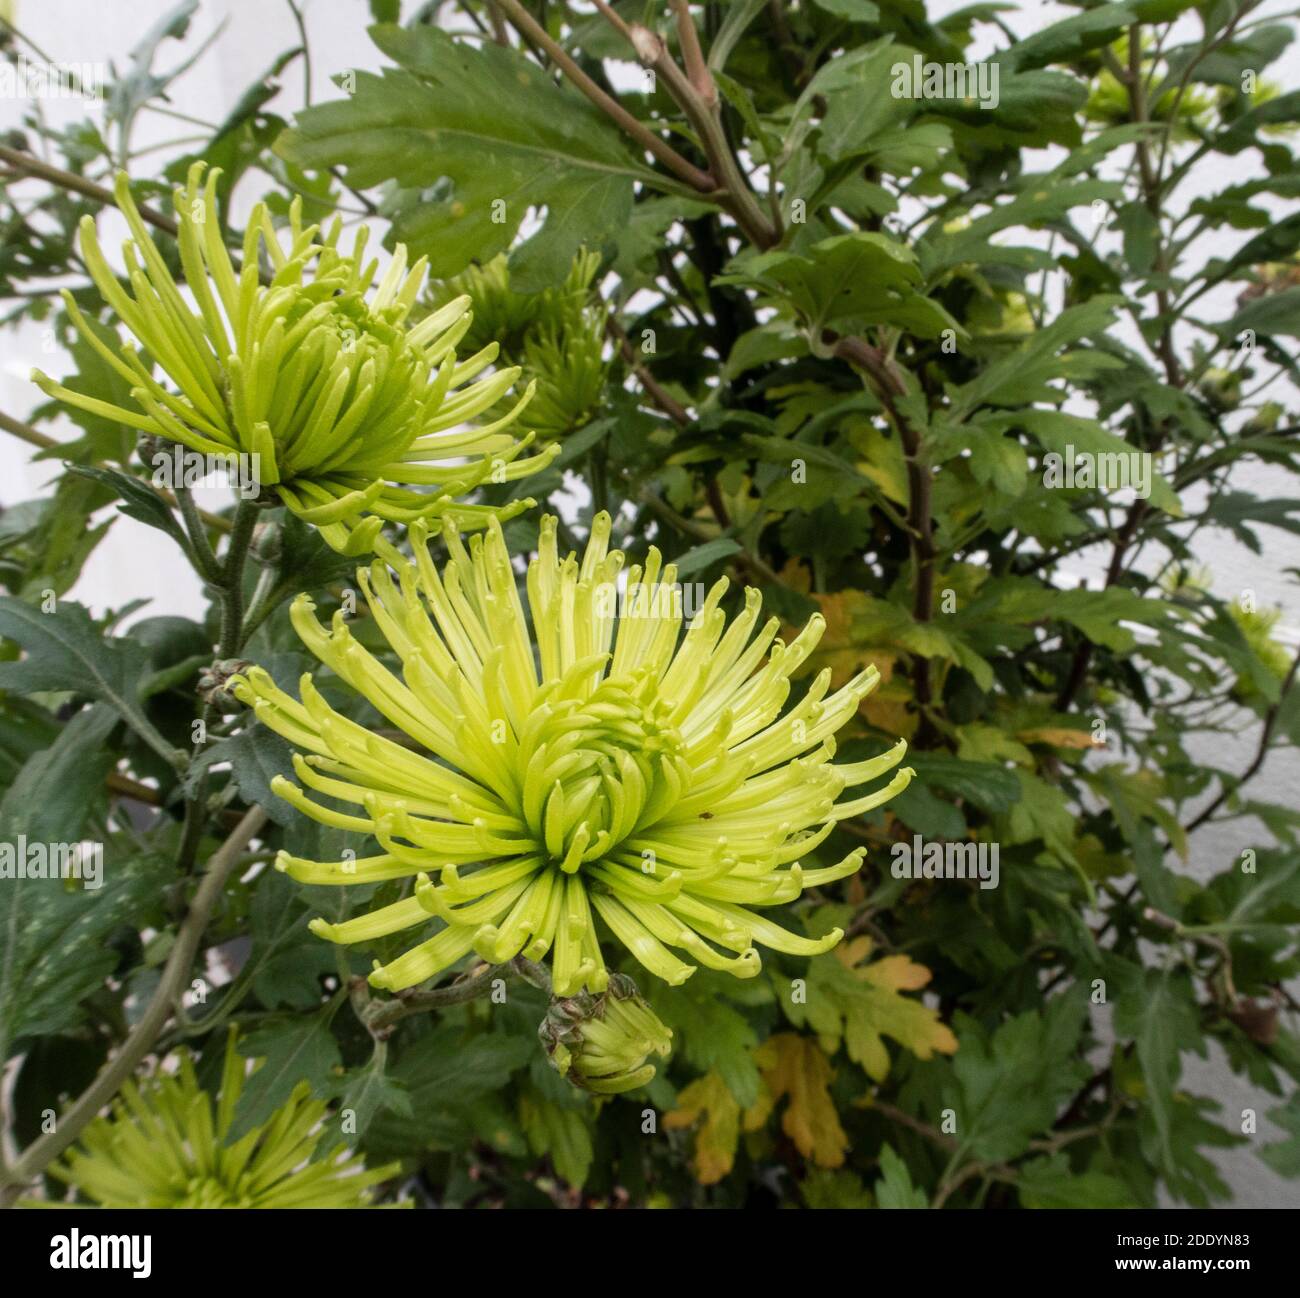 Chrysanthemum Anastasia Green, a pale green variety useful for flower arranging. Dendranthema Anastasia Green. Spider chrysanthemum Anastasia Green. Stock Photo